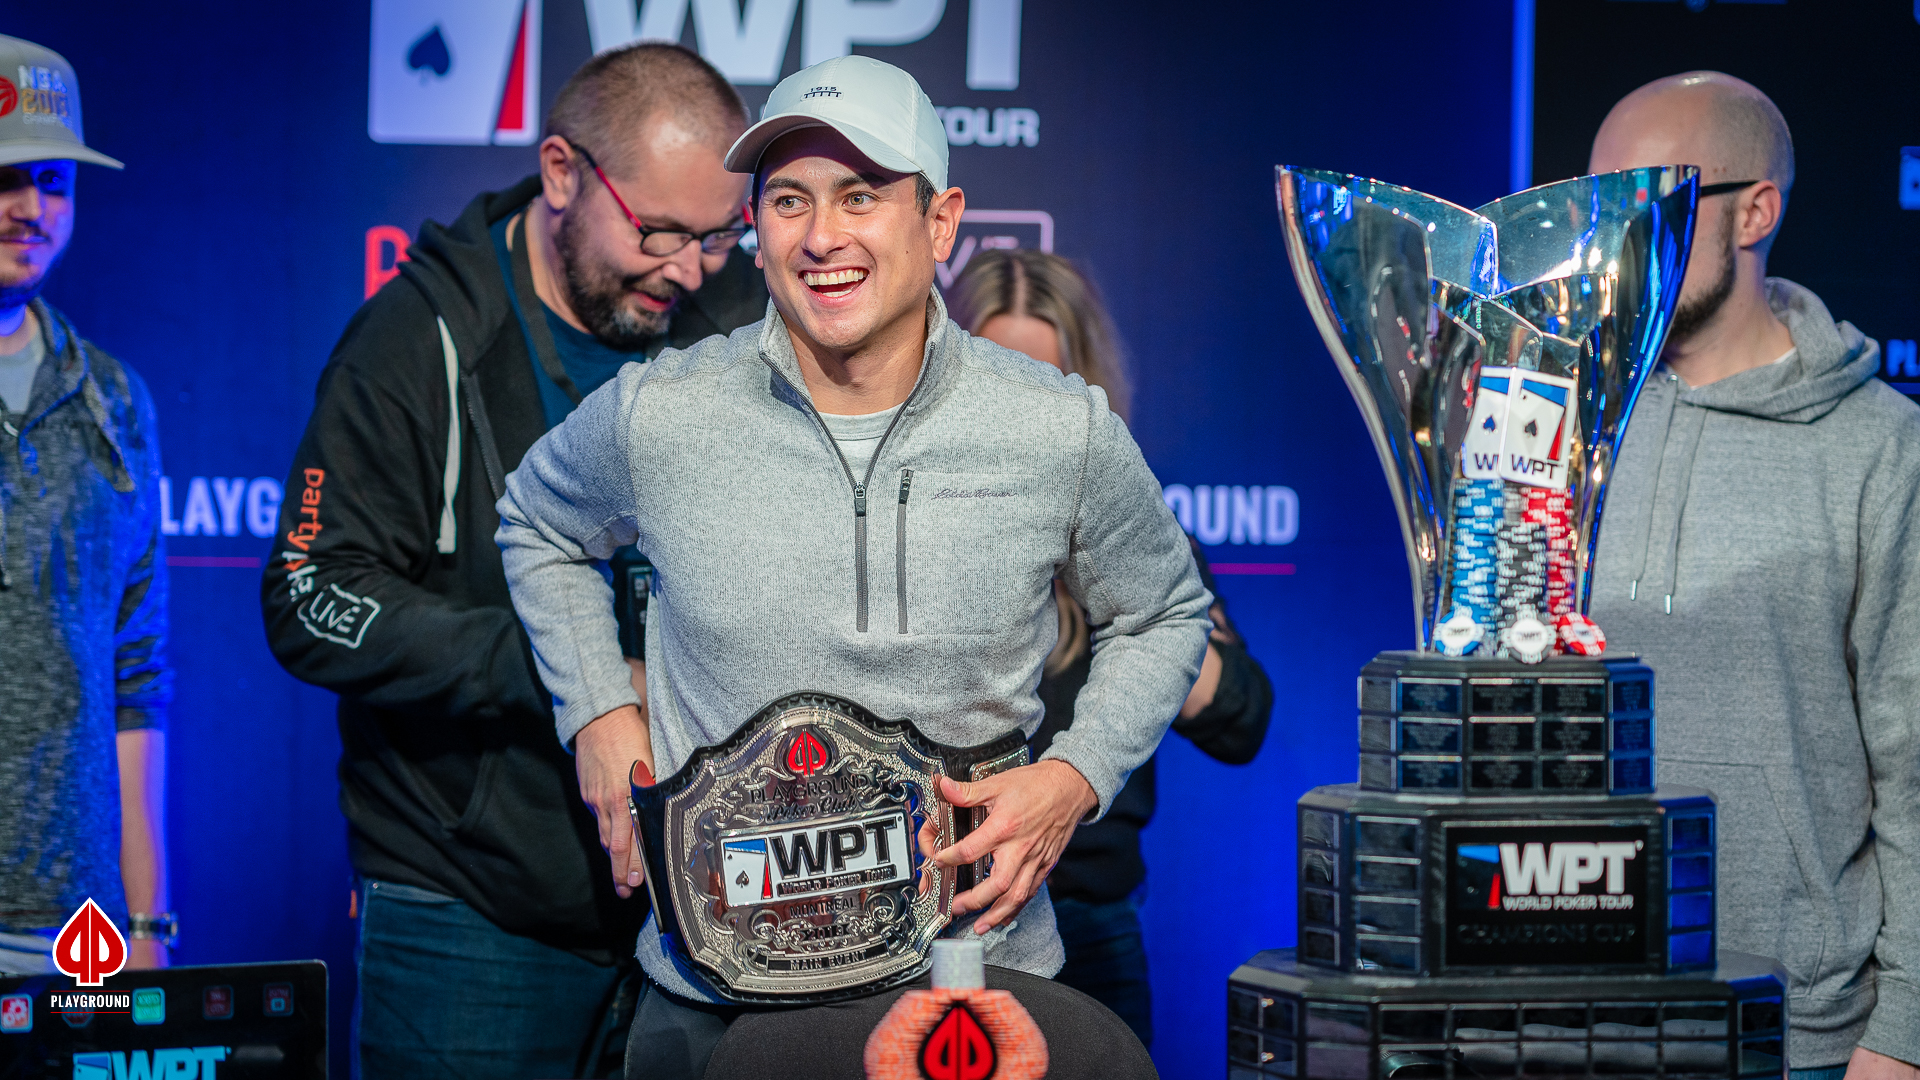 Our WPT Montreal Main Event Champion: Geoffrey Hum